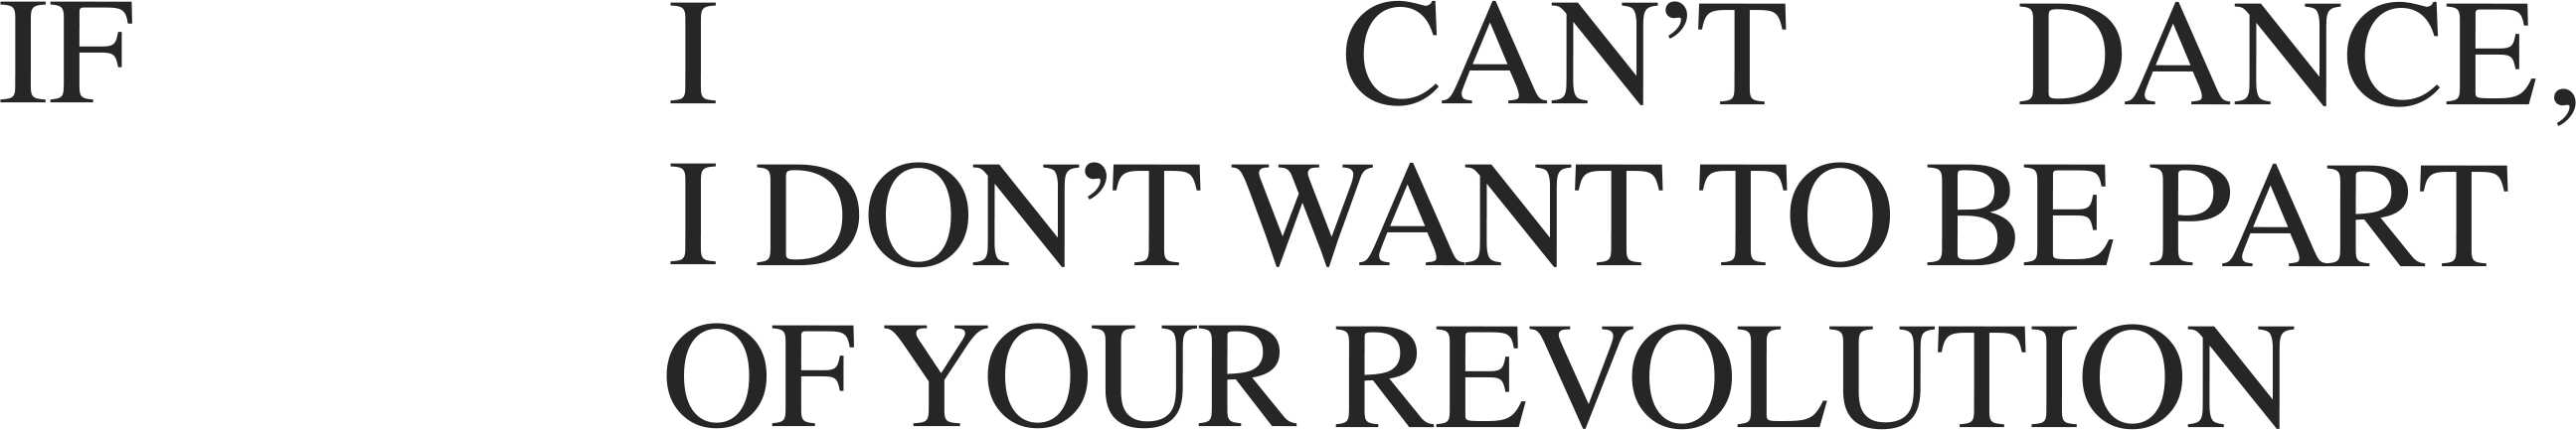 If I Can't Dance logo